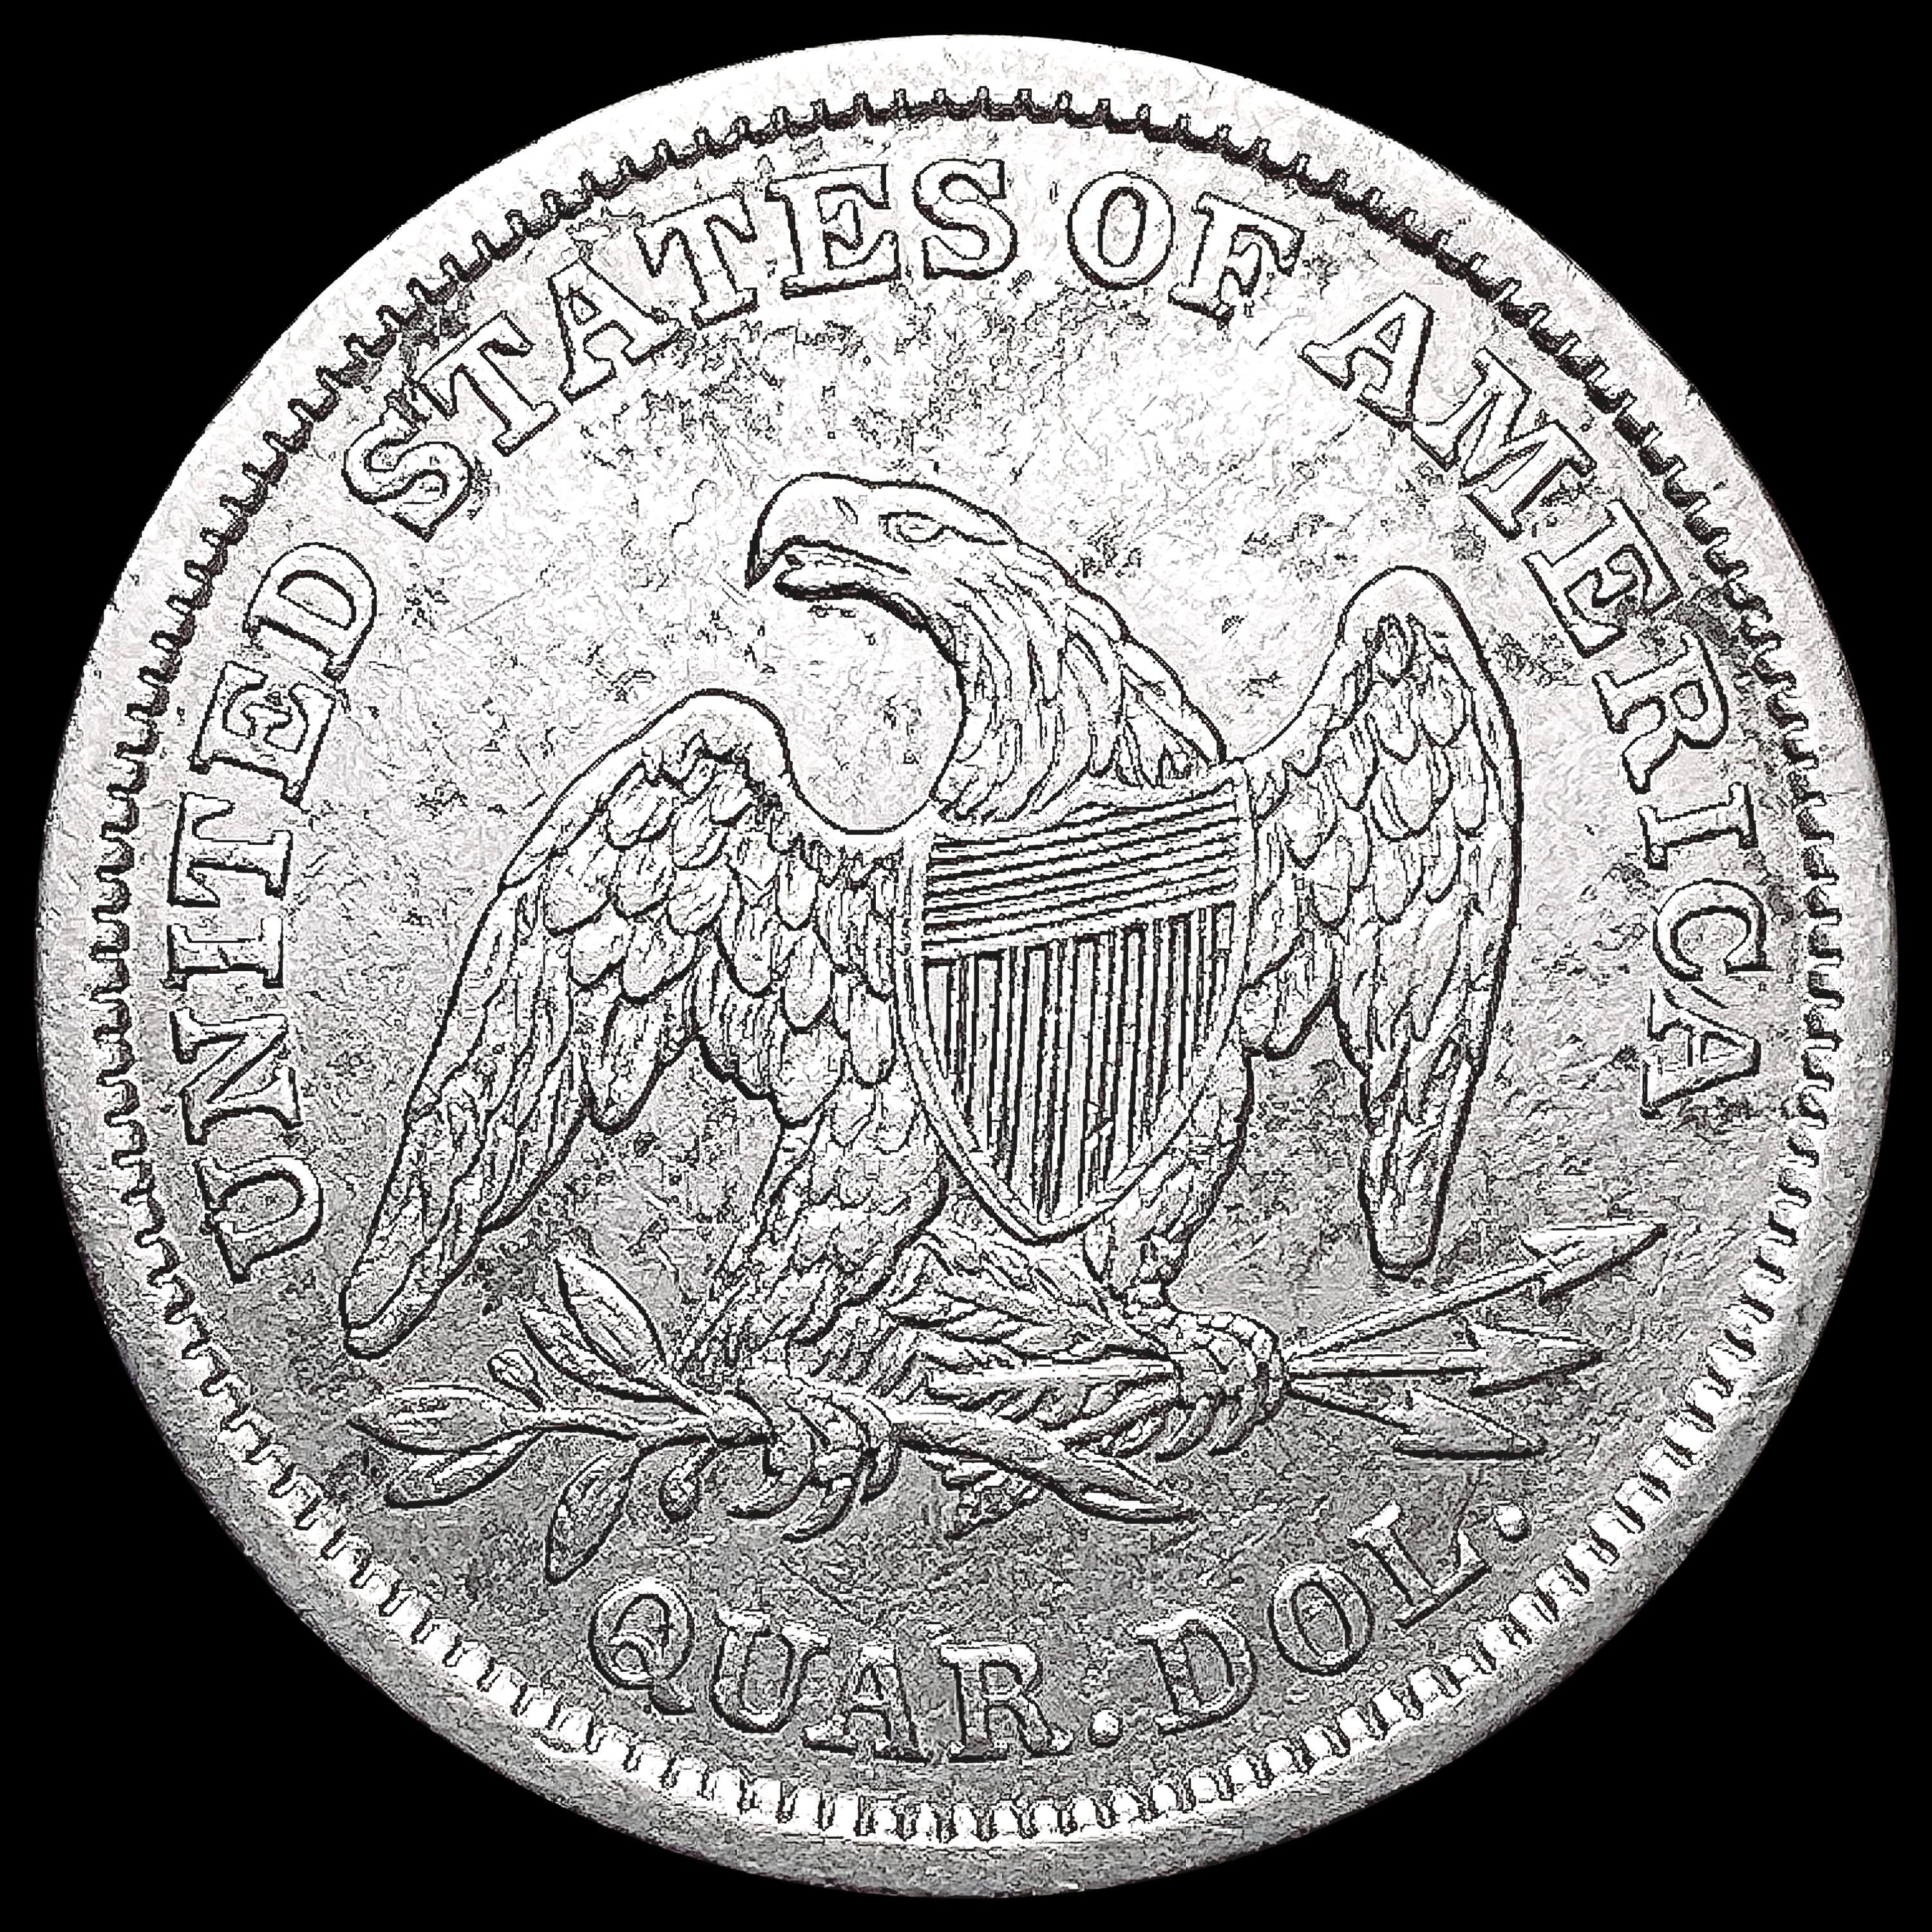 1838 Seated Liberty Quarter NEARLY UNCIRCULATED